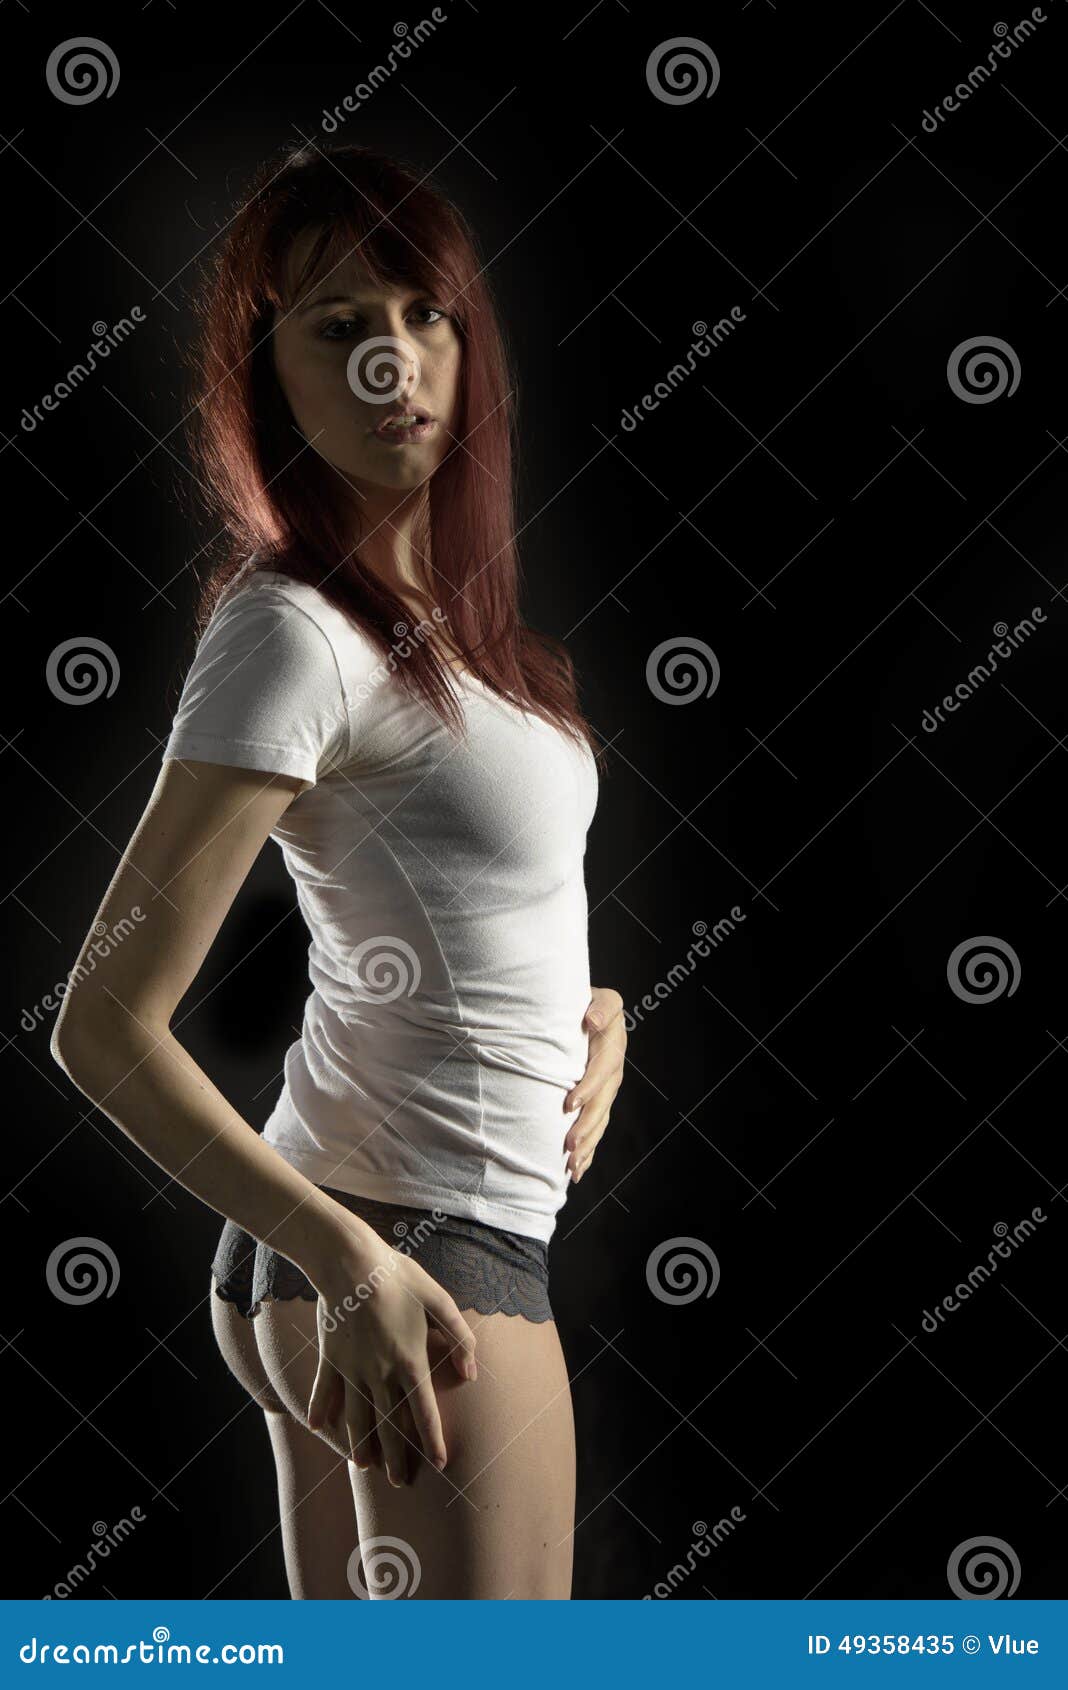 Woman Posing in White Shirt and Panties Stock Image - Image of